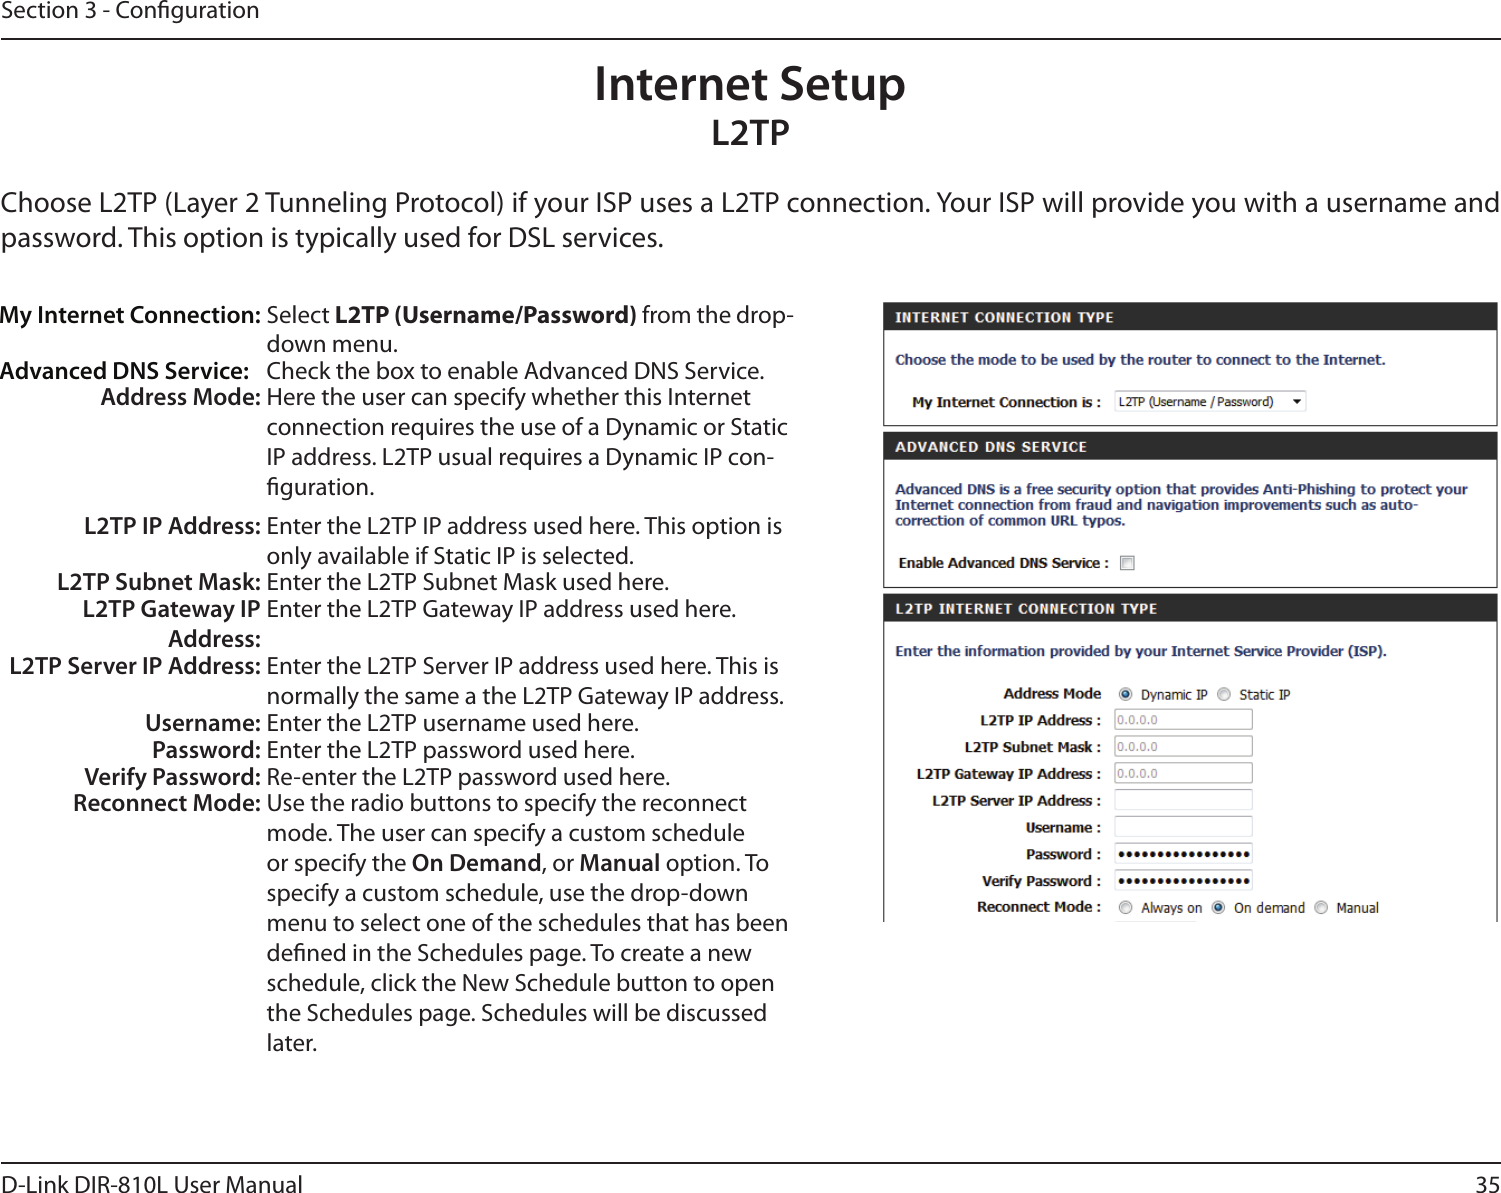 35D-Link DIR-810L User ManualSection 3 - CongurationInternet SetupL2TPChoose L2TP (Layer 2 Tunneling Protocol) if your ISP uses a L2TP connection. Your ISP will provide you with a username and password. This option is typically used for DSL services. My Internet Connection: Select L2TP (Username/Password) from the drop-down menu.Advanced DNS Service: Check the box to enable Advanced DNS Service.Address Mode: Here the user can specify whether this Internet connection requires the use of a Dynamic or Static IP address. L2TP usual requires a Dynamic IP con-guration.L2TP IP Address: Enter the L2TP IP address used here. This option is only available if Static IP is selected.L2TP Subnet Mask: Enter the L2TP Subnet Mask used here.L2TP Gateway IP Address:Enter the L2TP Gateway IP address used here.L2TP Server IP Address: Enter the L2TP Server IP address used here. This is normally the same a the L2TP Gateway IP address.Username: Enter the L2TP username used here.Password: Enter the L2TP password used here.Verify Password: Re-enter the L2TP password used here.Reconnect Mode: Use the radio buttons to specify the reconnect mode. The user can specify a custom schedule or specify the On Demand, or Manual option. To specify a custom schedule, use the drop-down menu to select one of the schedules that has been dened in the Schedules page. To create a new schedule, click the New Schedule button to open the Schedules page. Schedules will be discussed later.